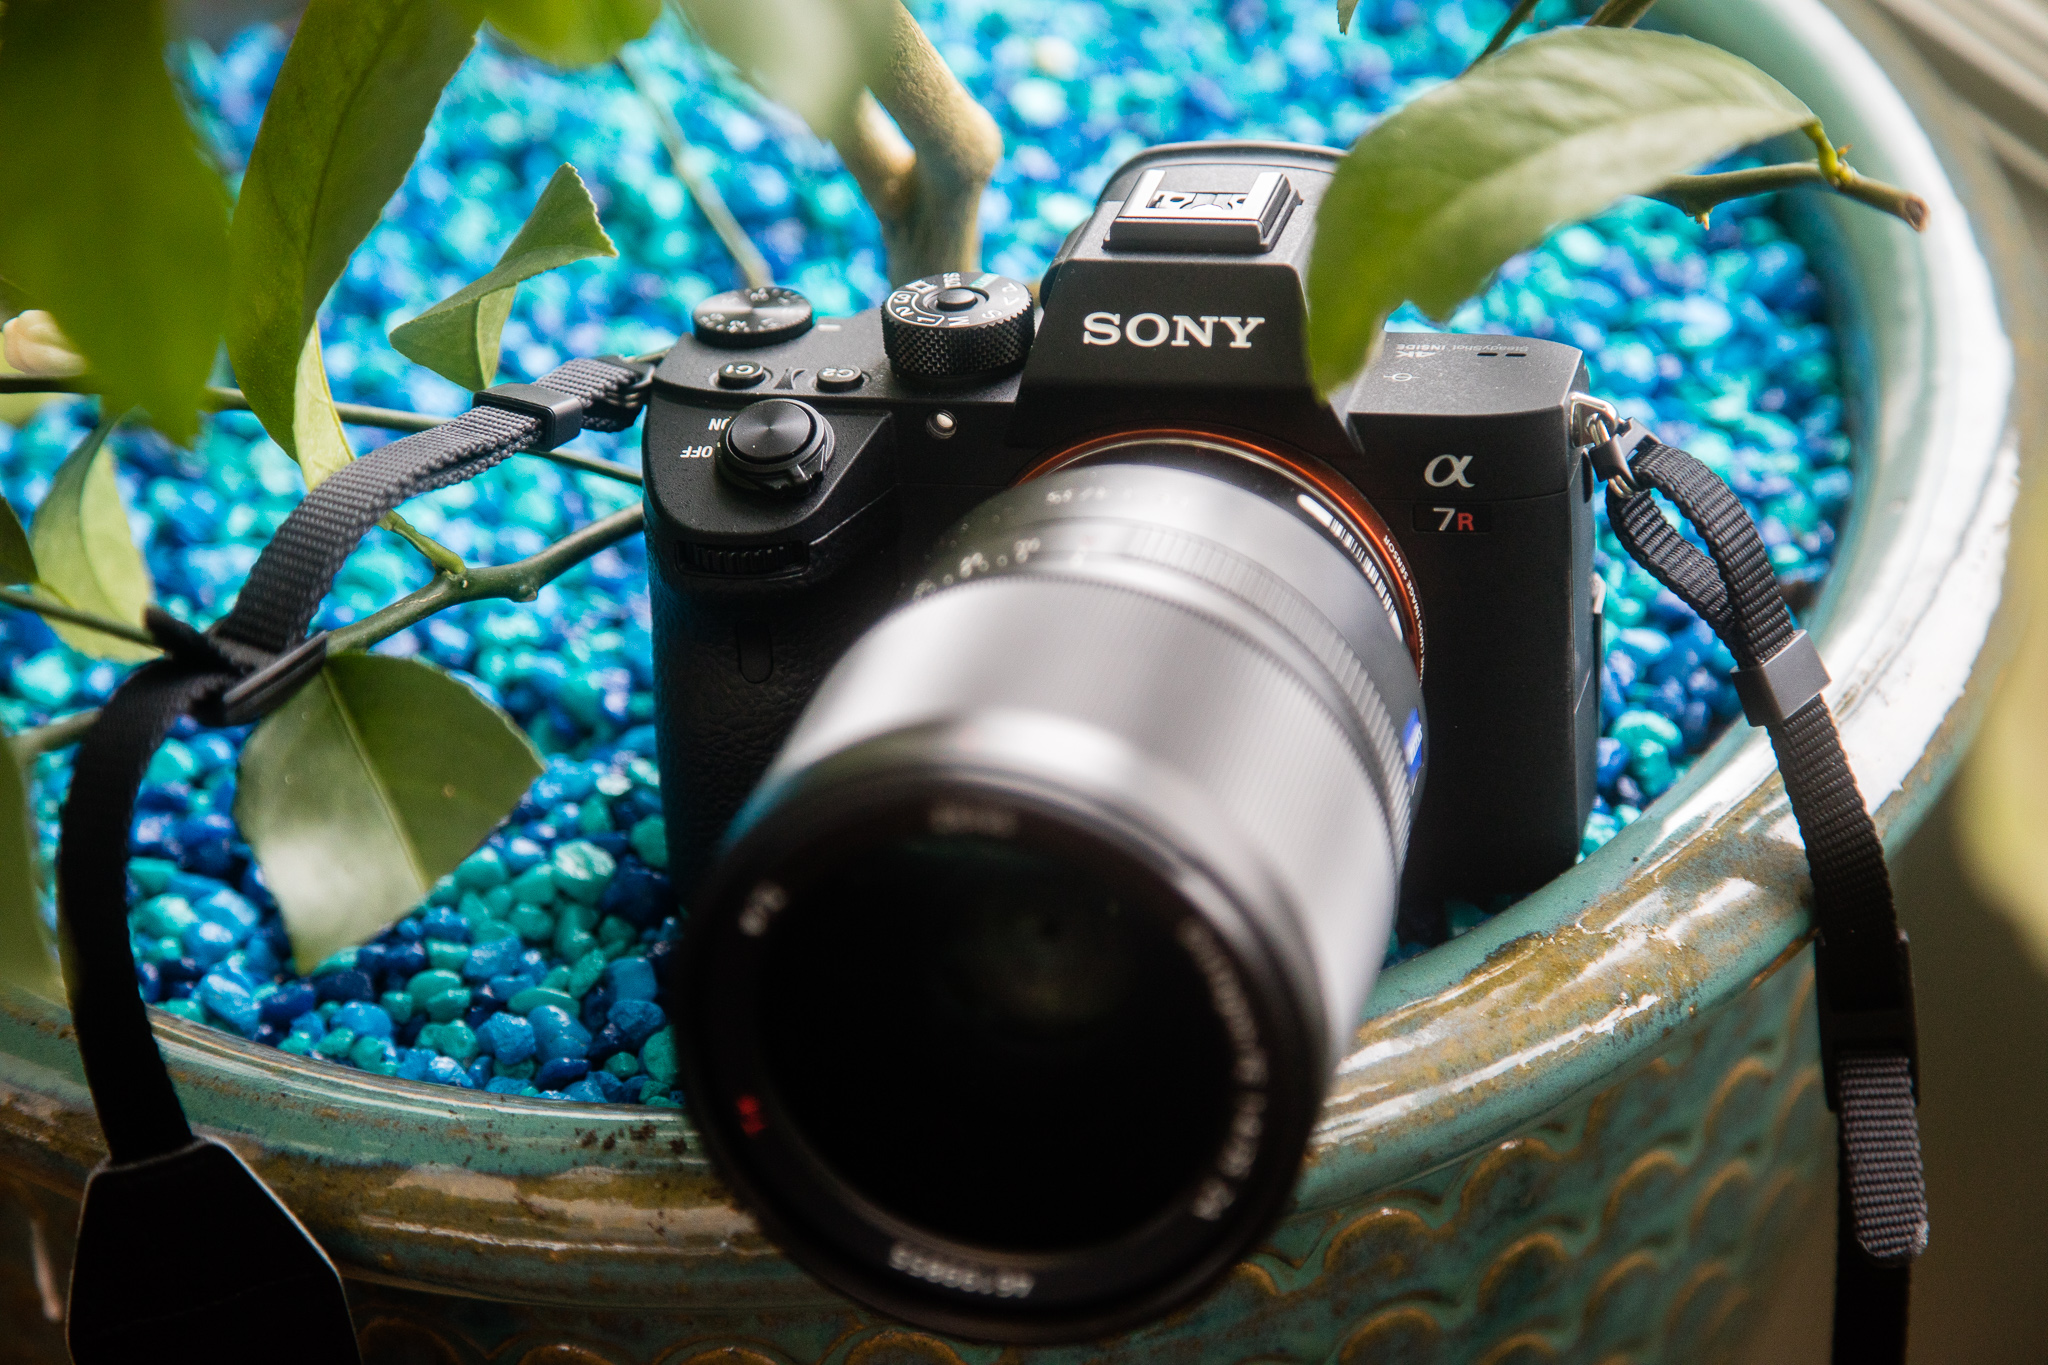 The sony A7R Mark III is the best camera of 2017